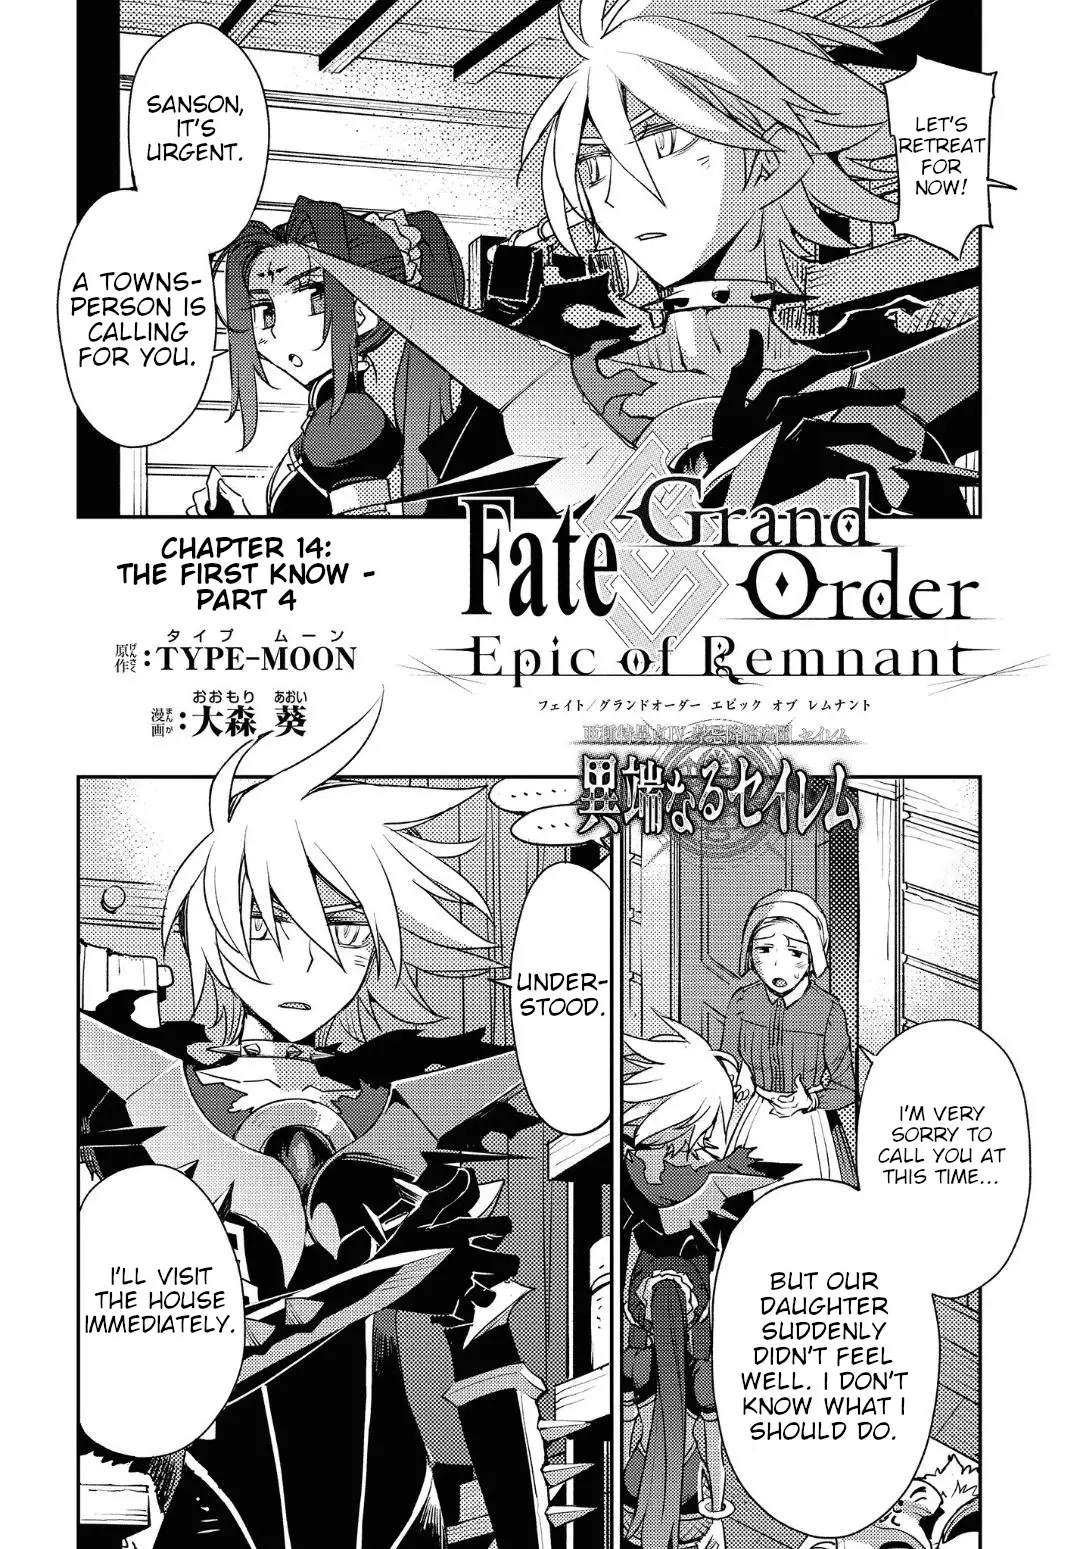 Fate/grand Order: Epic Of Remnant - Subspecies Singularity Iv: Taboo Advent Salem: Salem Of Heresy - 14 page 3